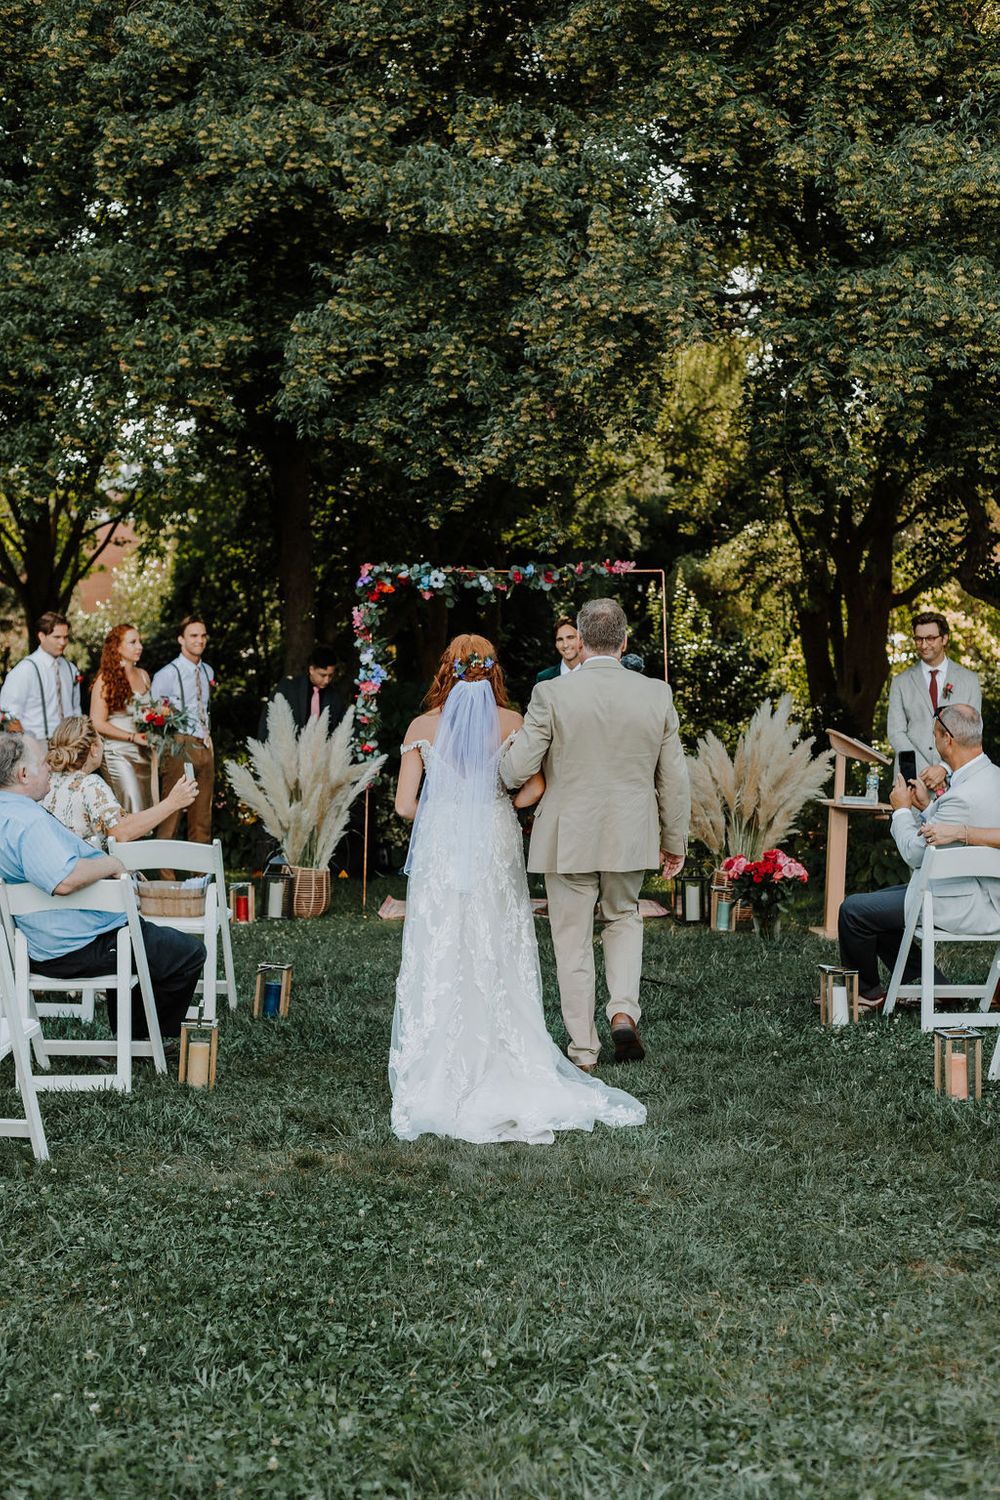 Wedding ceremony on the wedding lawn. Photo by Maddie Lilly Photography